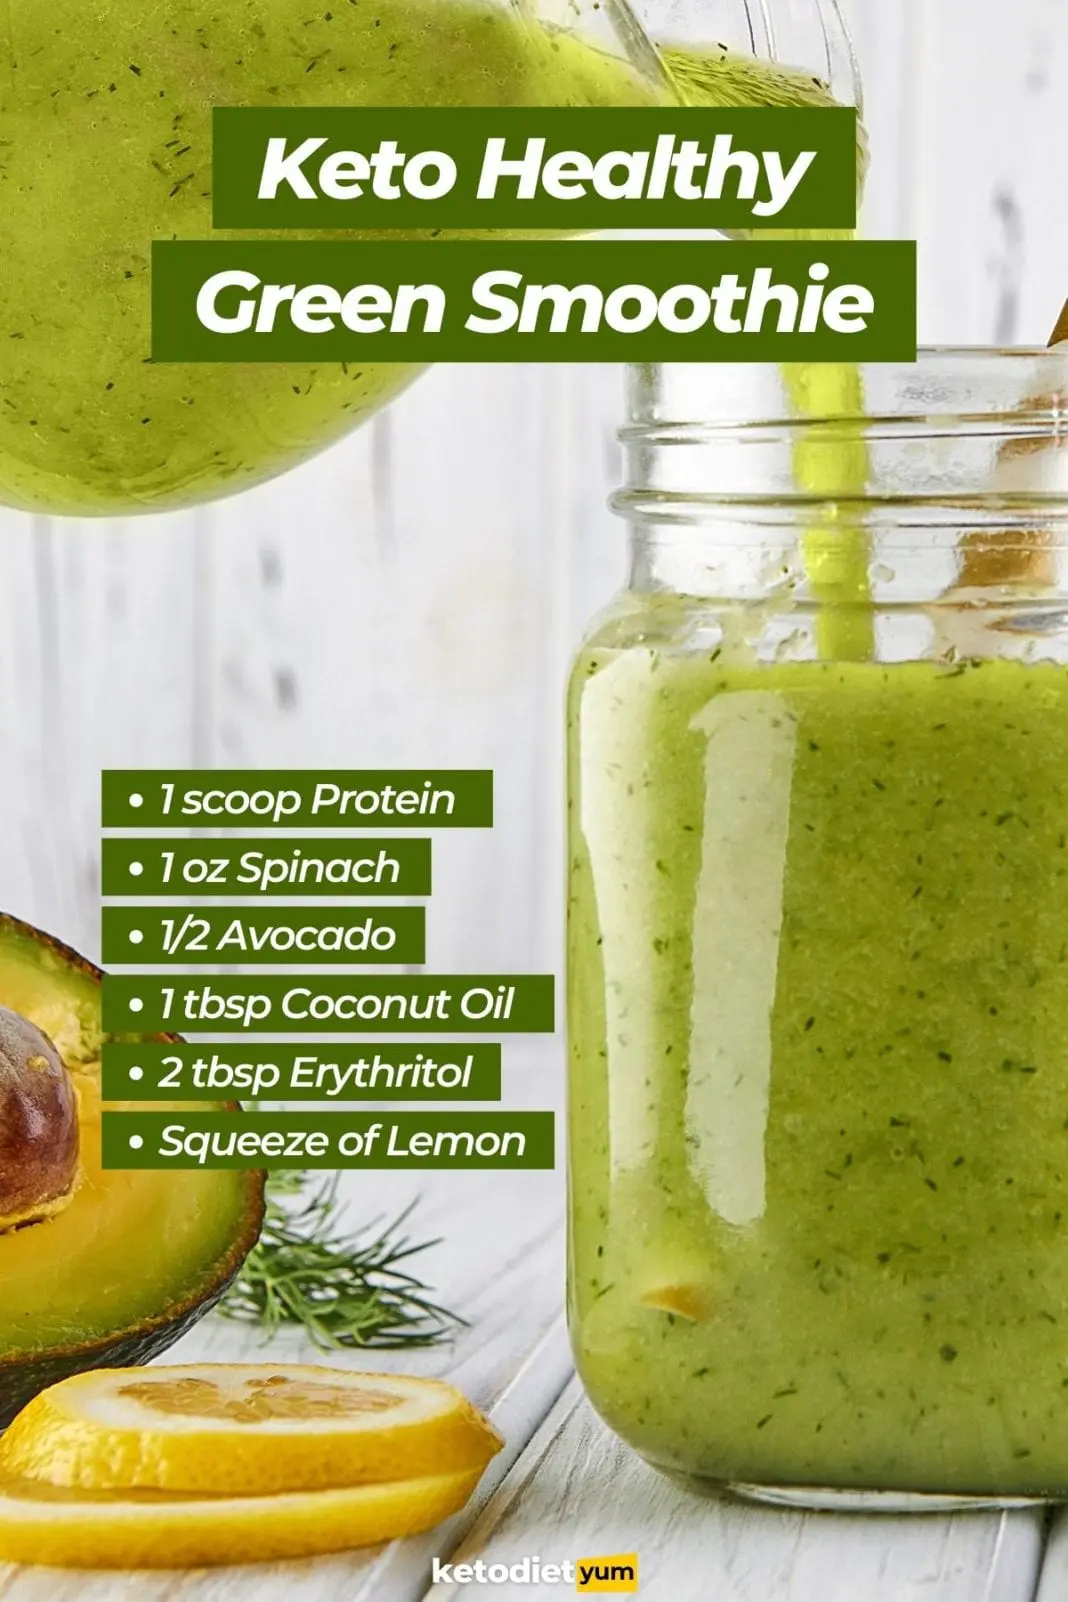 Keto Smoothies For Weight Loss: 6 Top Low